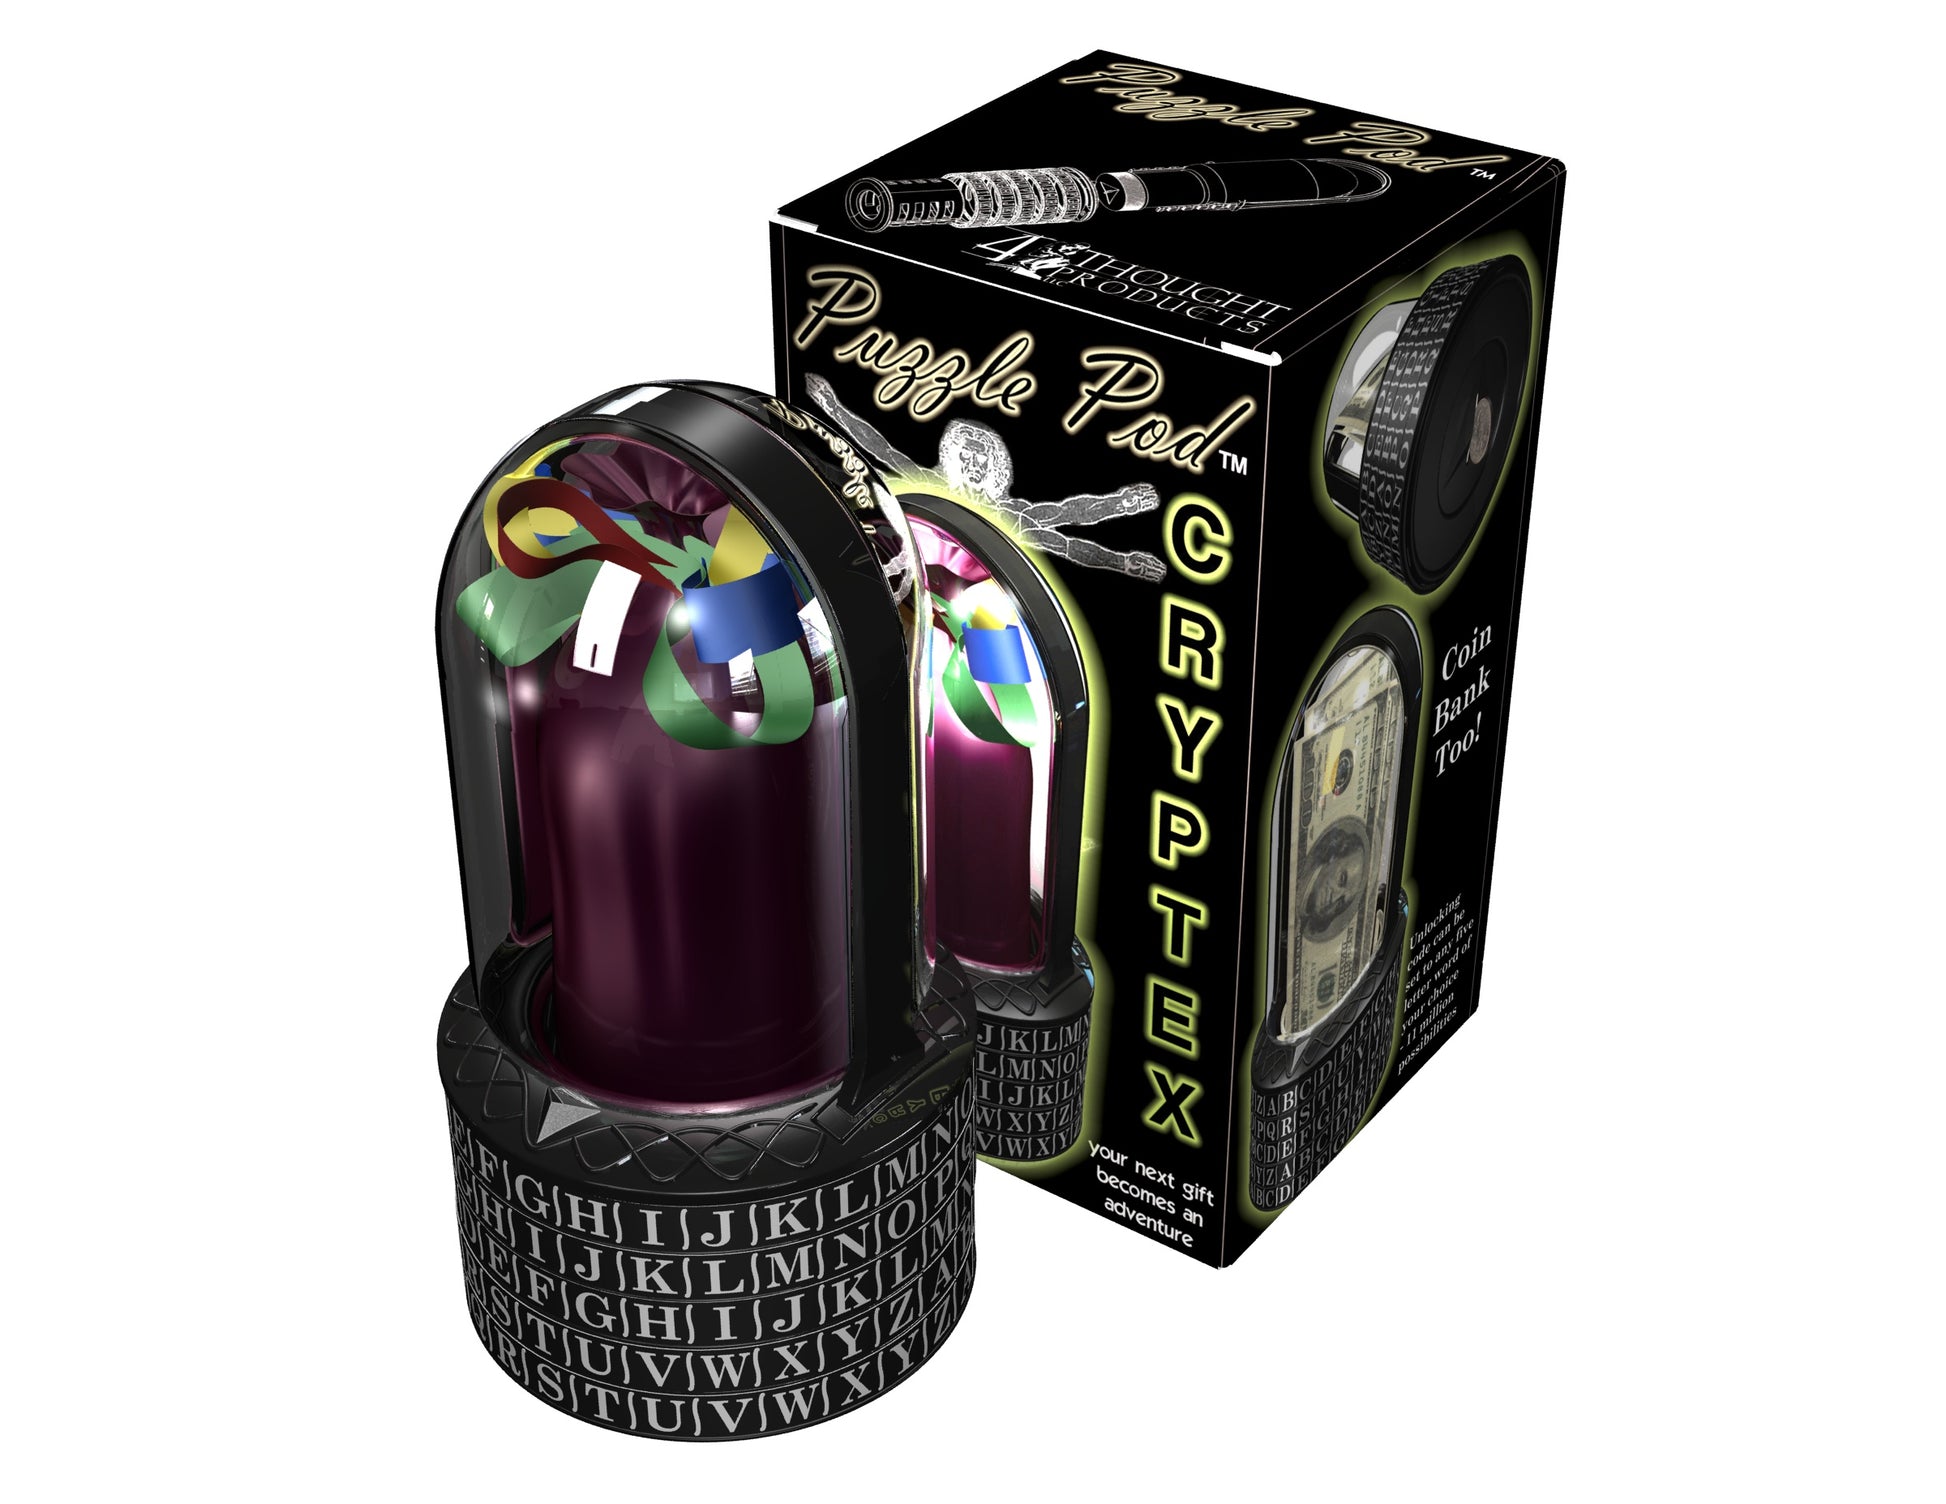 Puzzle Pod Cryptex Money Puzzle Box Package